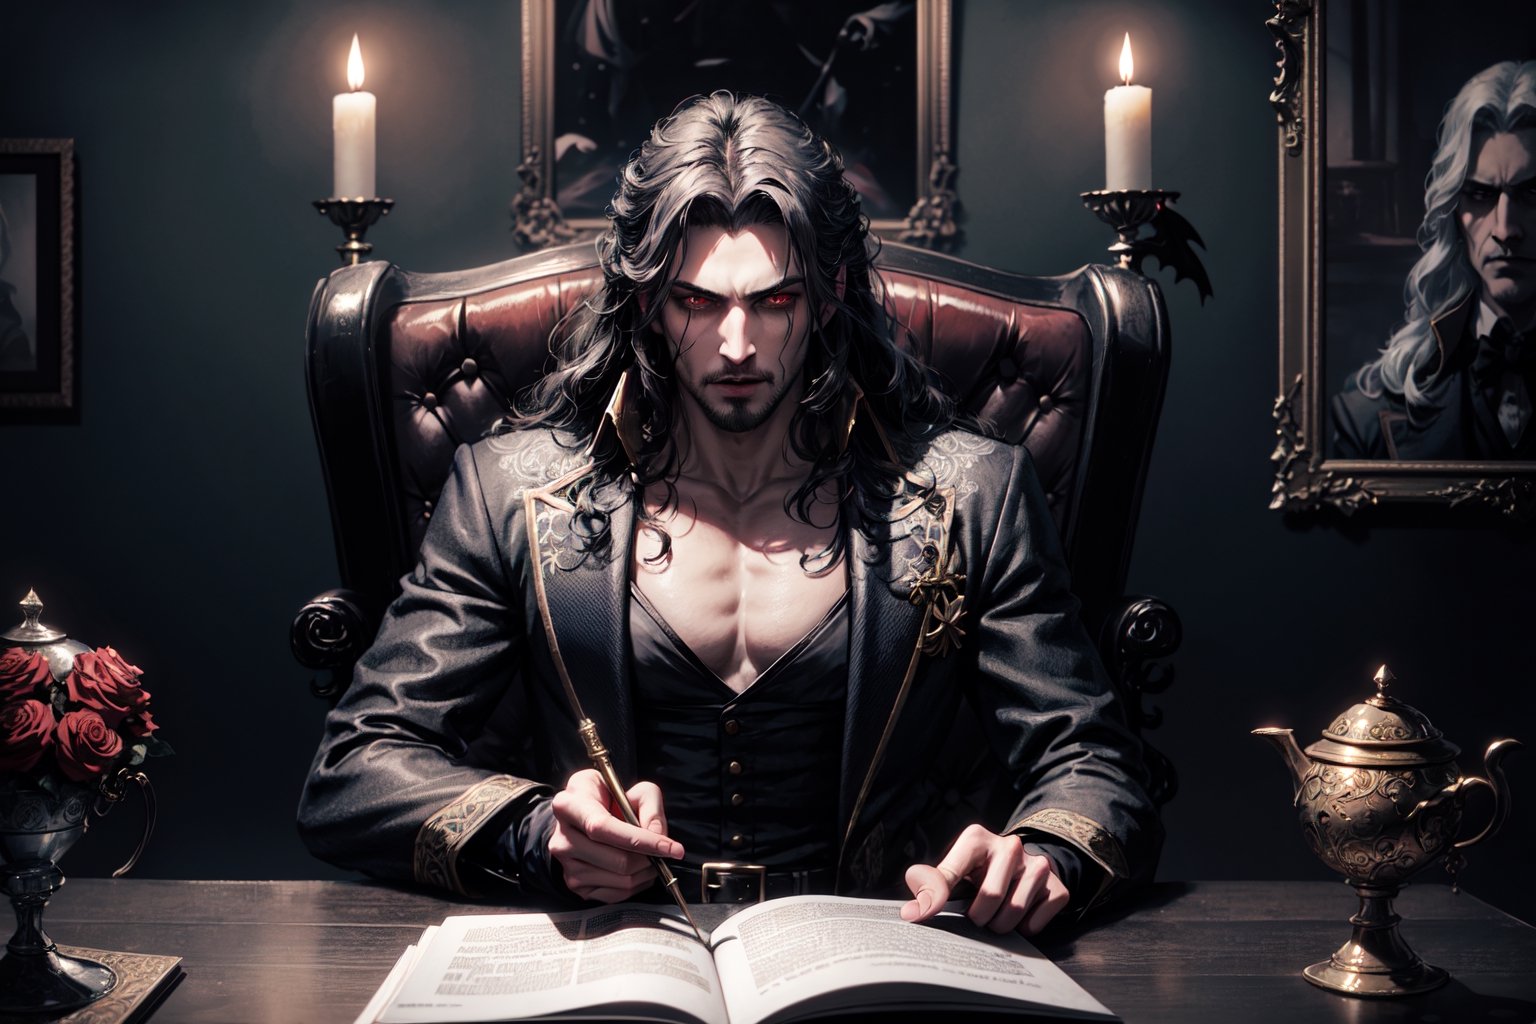 masterpiece,best quality,ultra-detailed,High detailed,picture-perfect face,((full-body_portrait)),1male,manly,black hair,confident,arrogant,long hair,curly hair,red glowing eyes,fangs,dracula,castlevania,konami,infront of gothic castle,red and black vamiper attire,ornate and intricate,gold trim,belt,epic pose,fantasy,town,1male,draculacastlevania
on his gothic throne,alucardcastlevania,DonMDj1nnM4g1cXL 